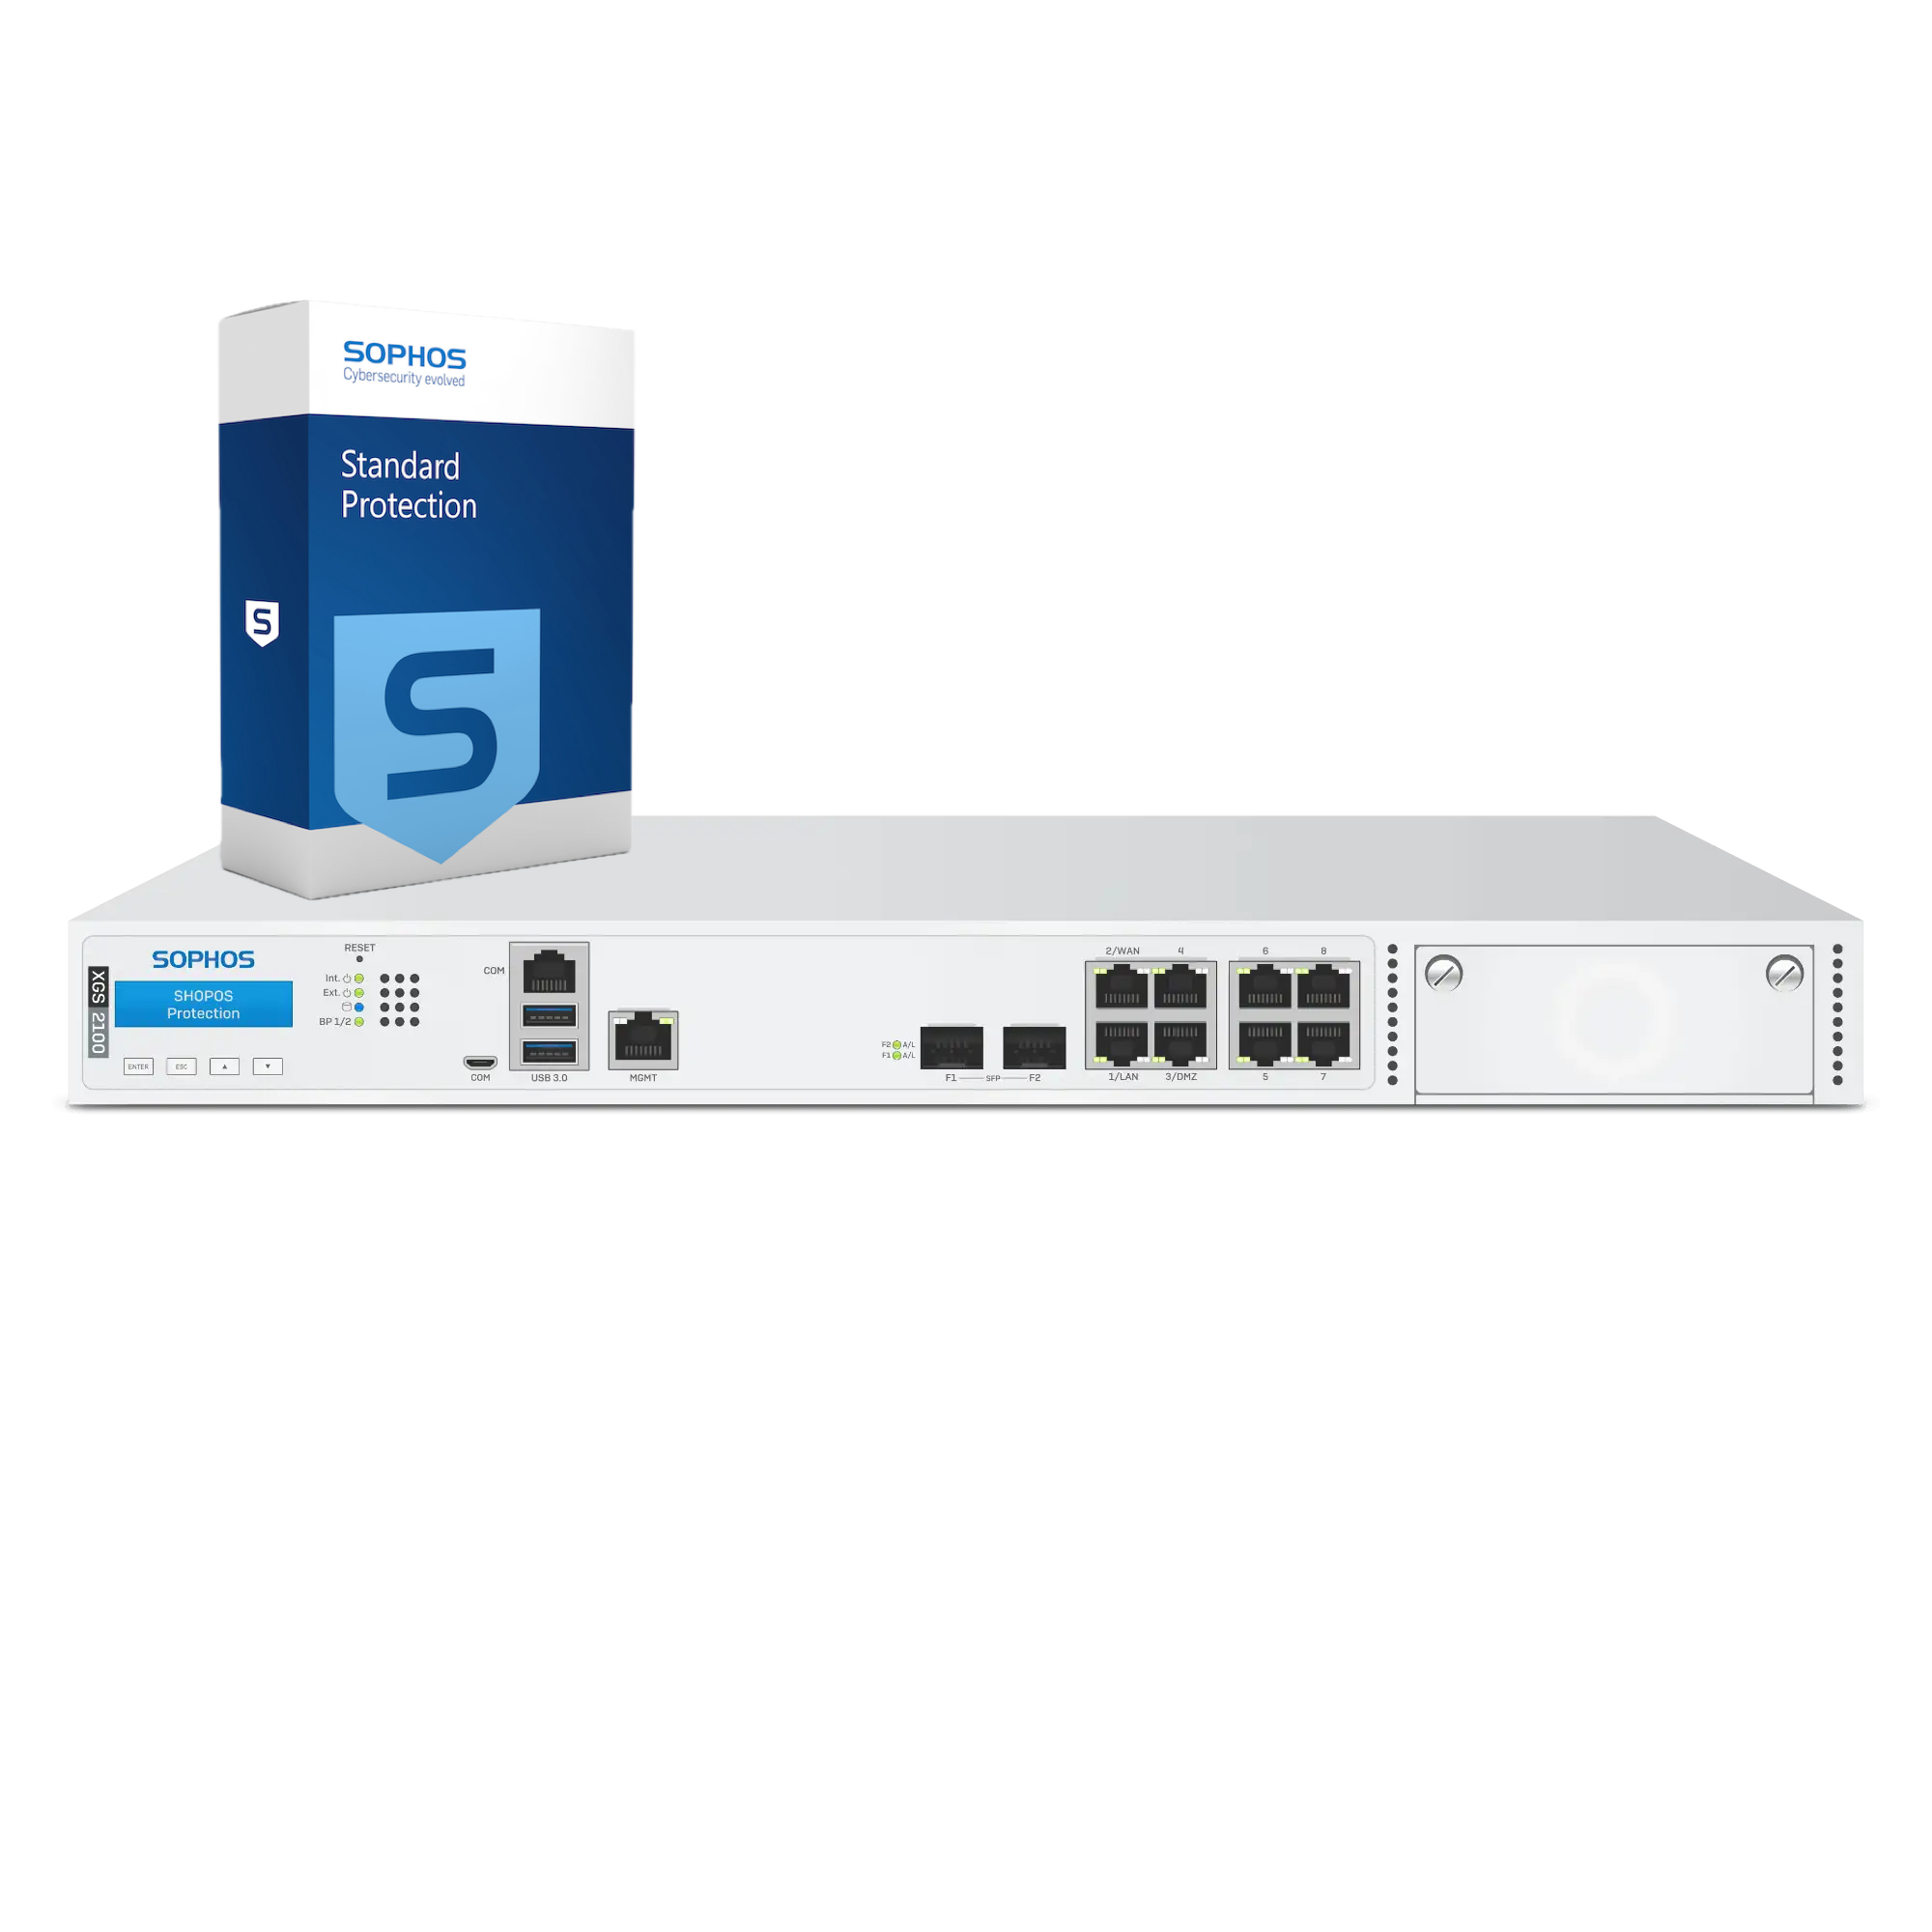 Sophos XGS 2100 Firewall with Standard Protection, 1-year - EU power cord